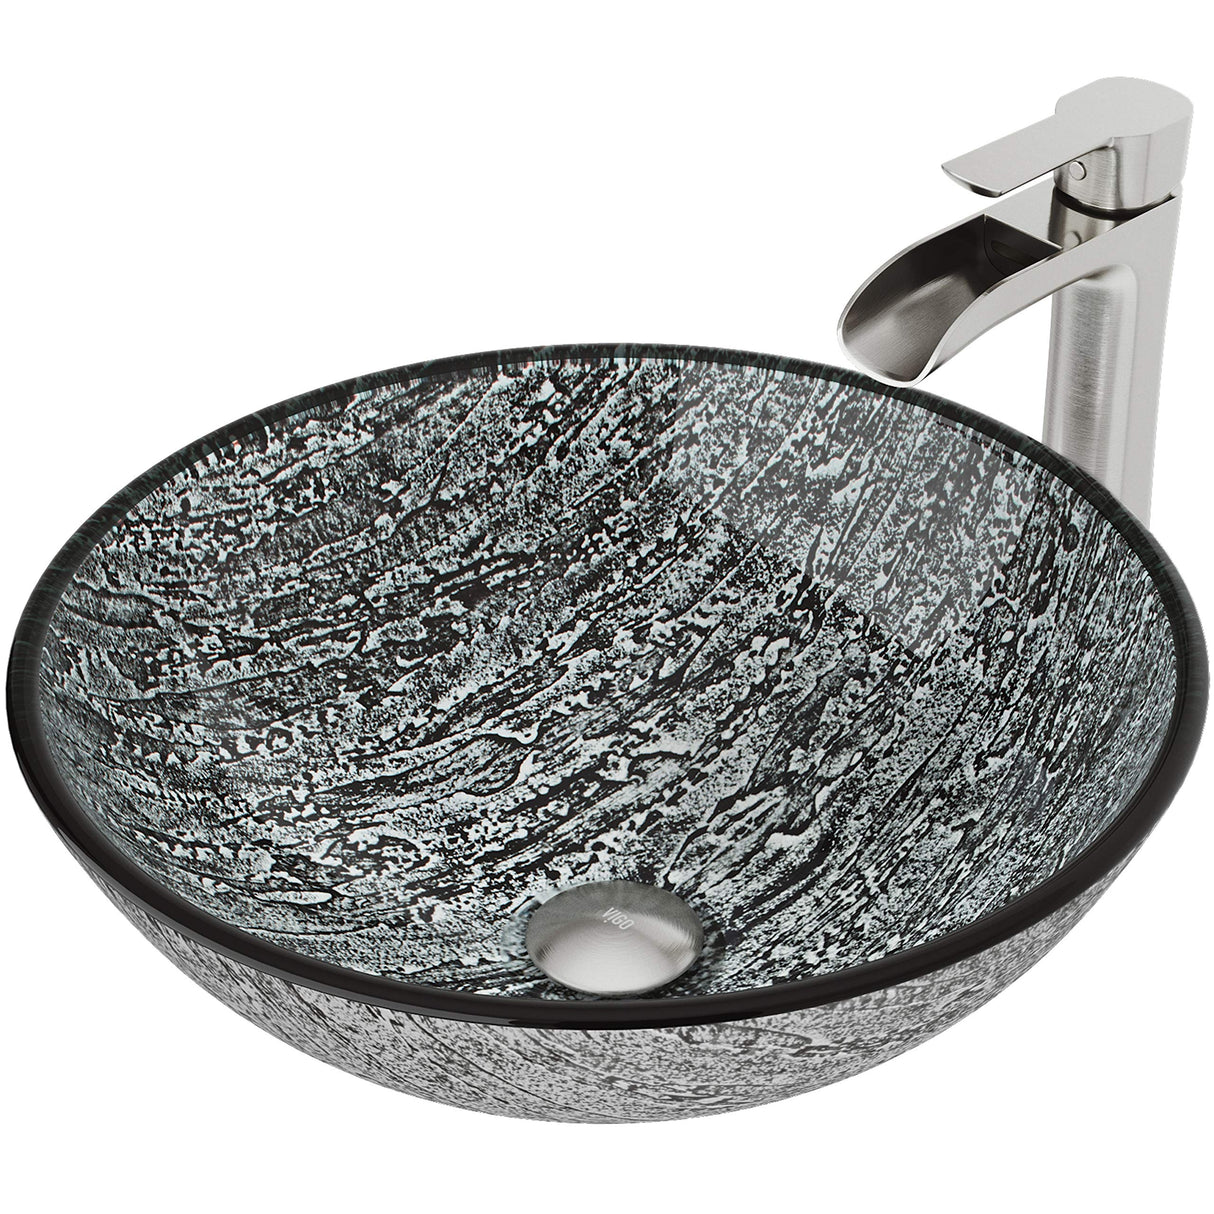 VIGO VGT1056 16.5" L -16.5" W -10.5" H Handmade Glass Round Vessel Bathroom Sink Set in Slate Grey Finish with Brushed Nickel Single-Handle Single Hole Waterfall Faucet and Pop Up Drain